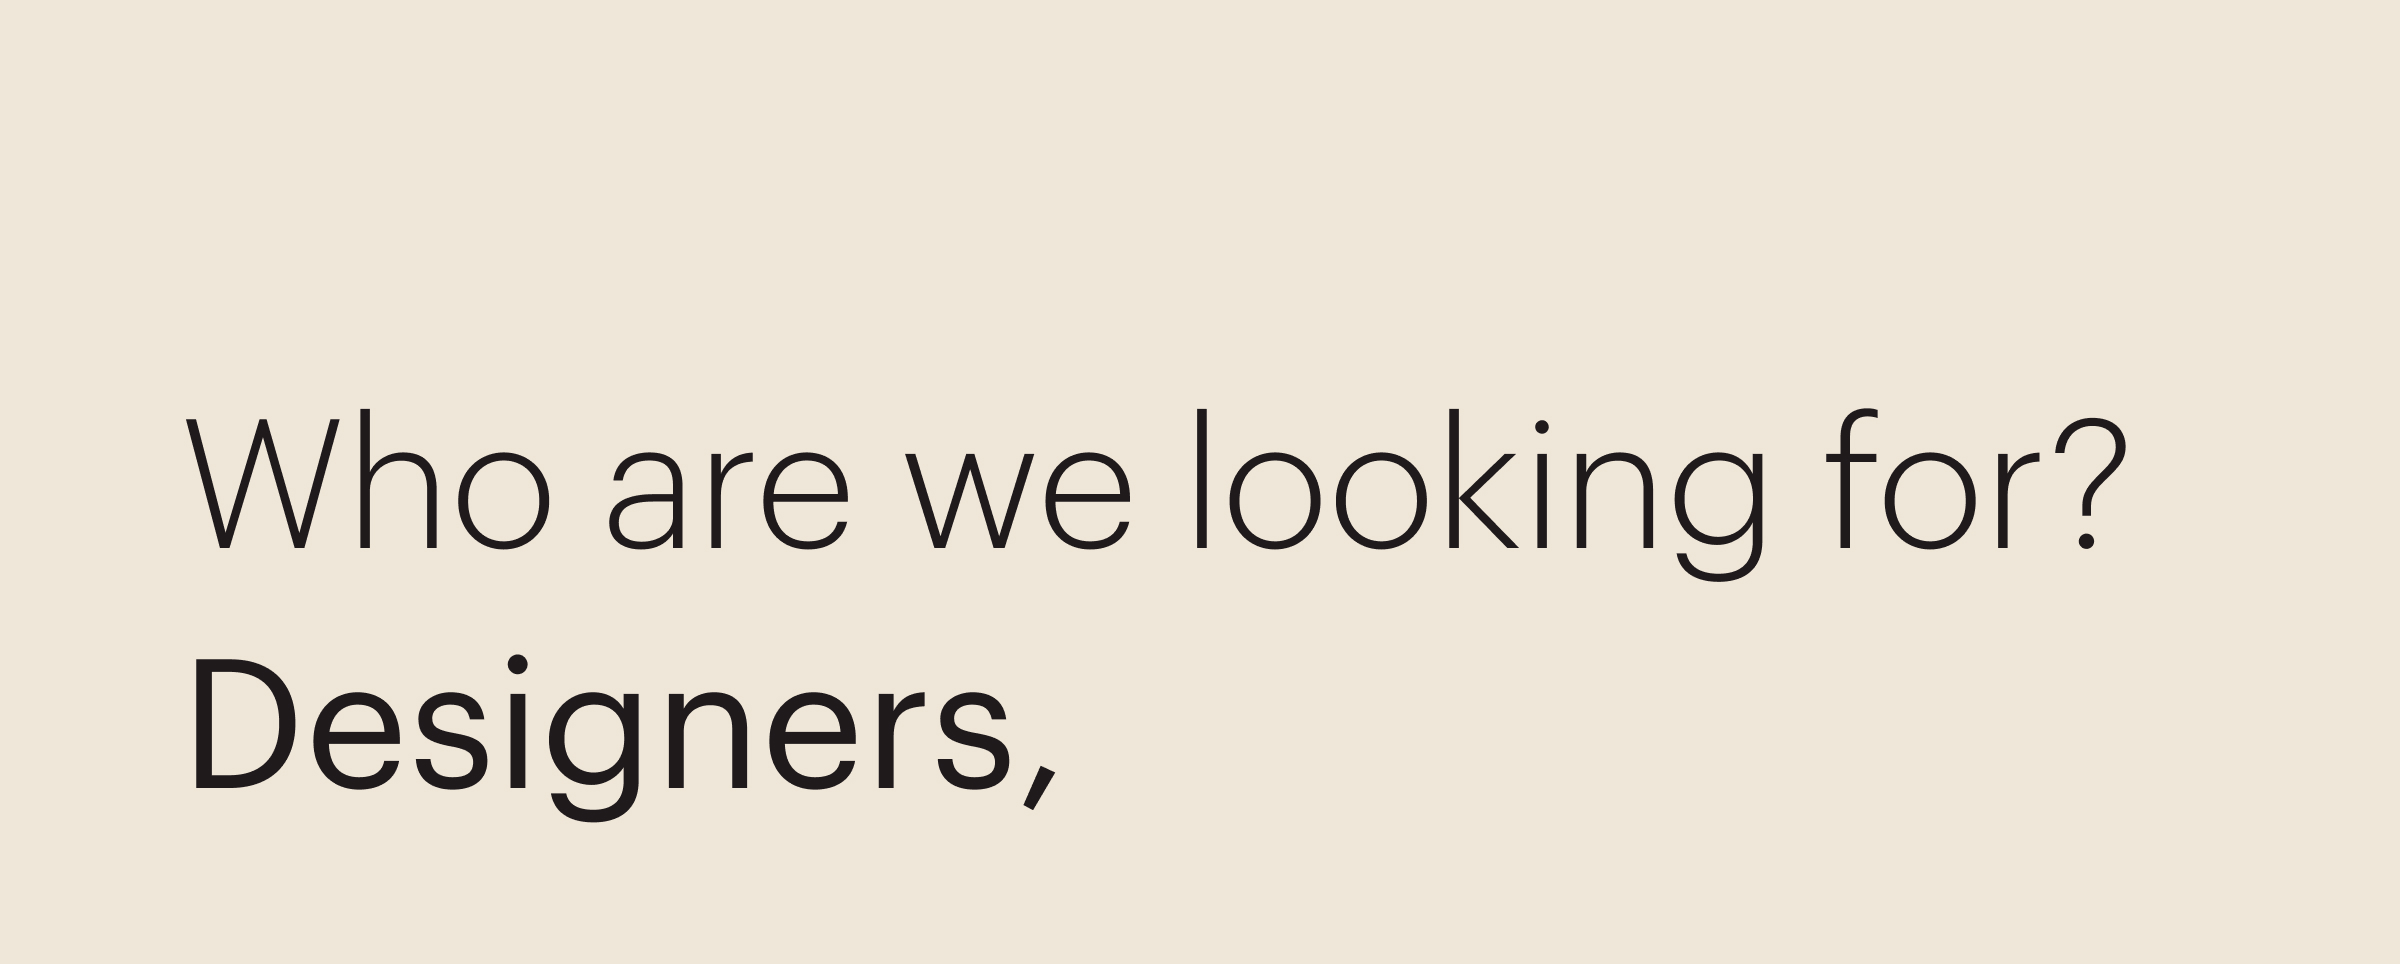 Who are we looking for?